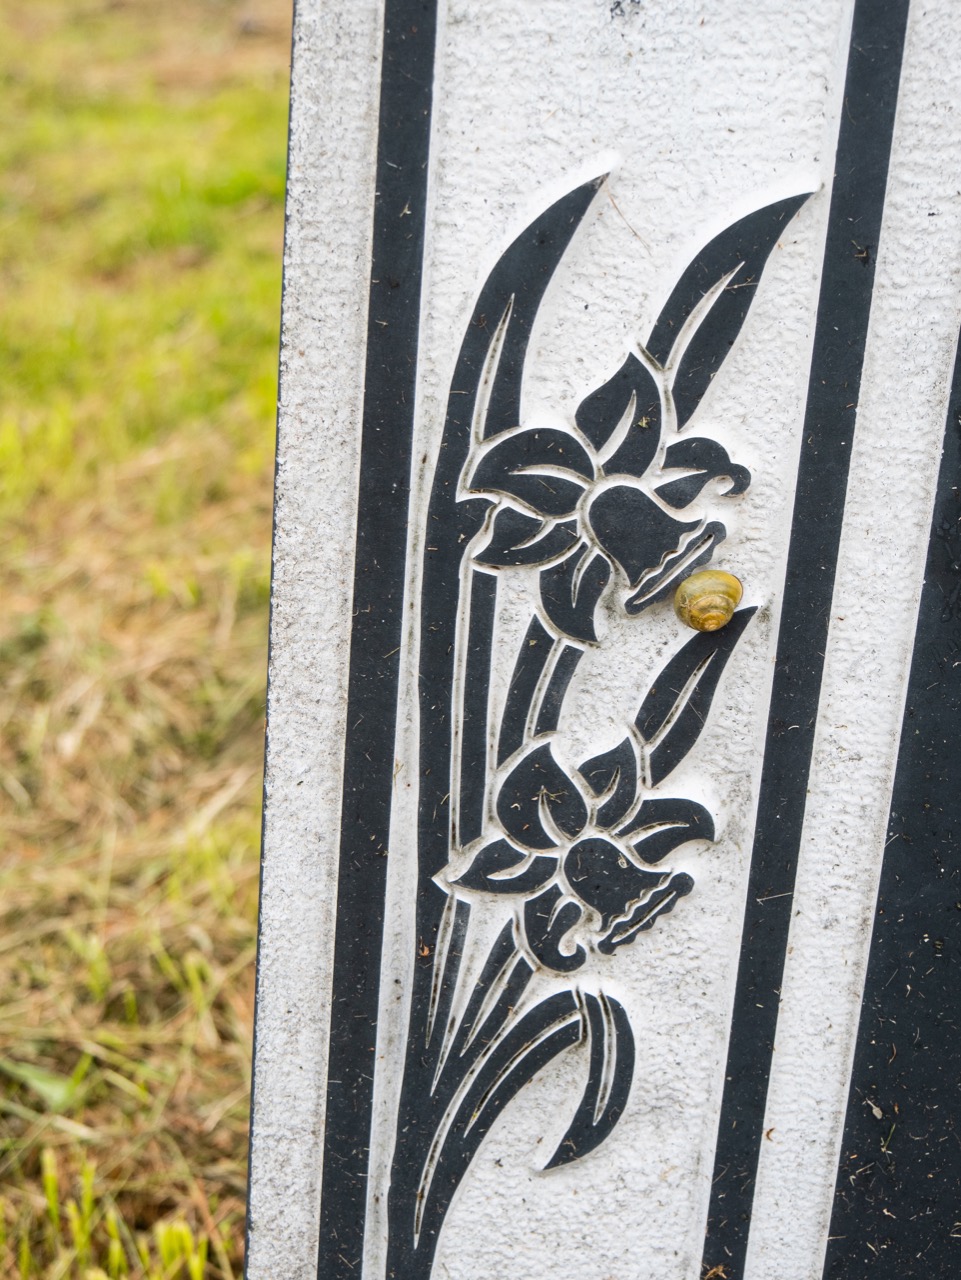 Daffodils (and a snail) on a tombstone